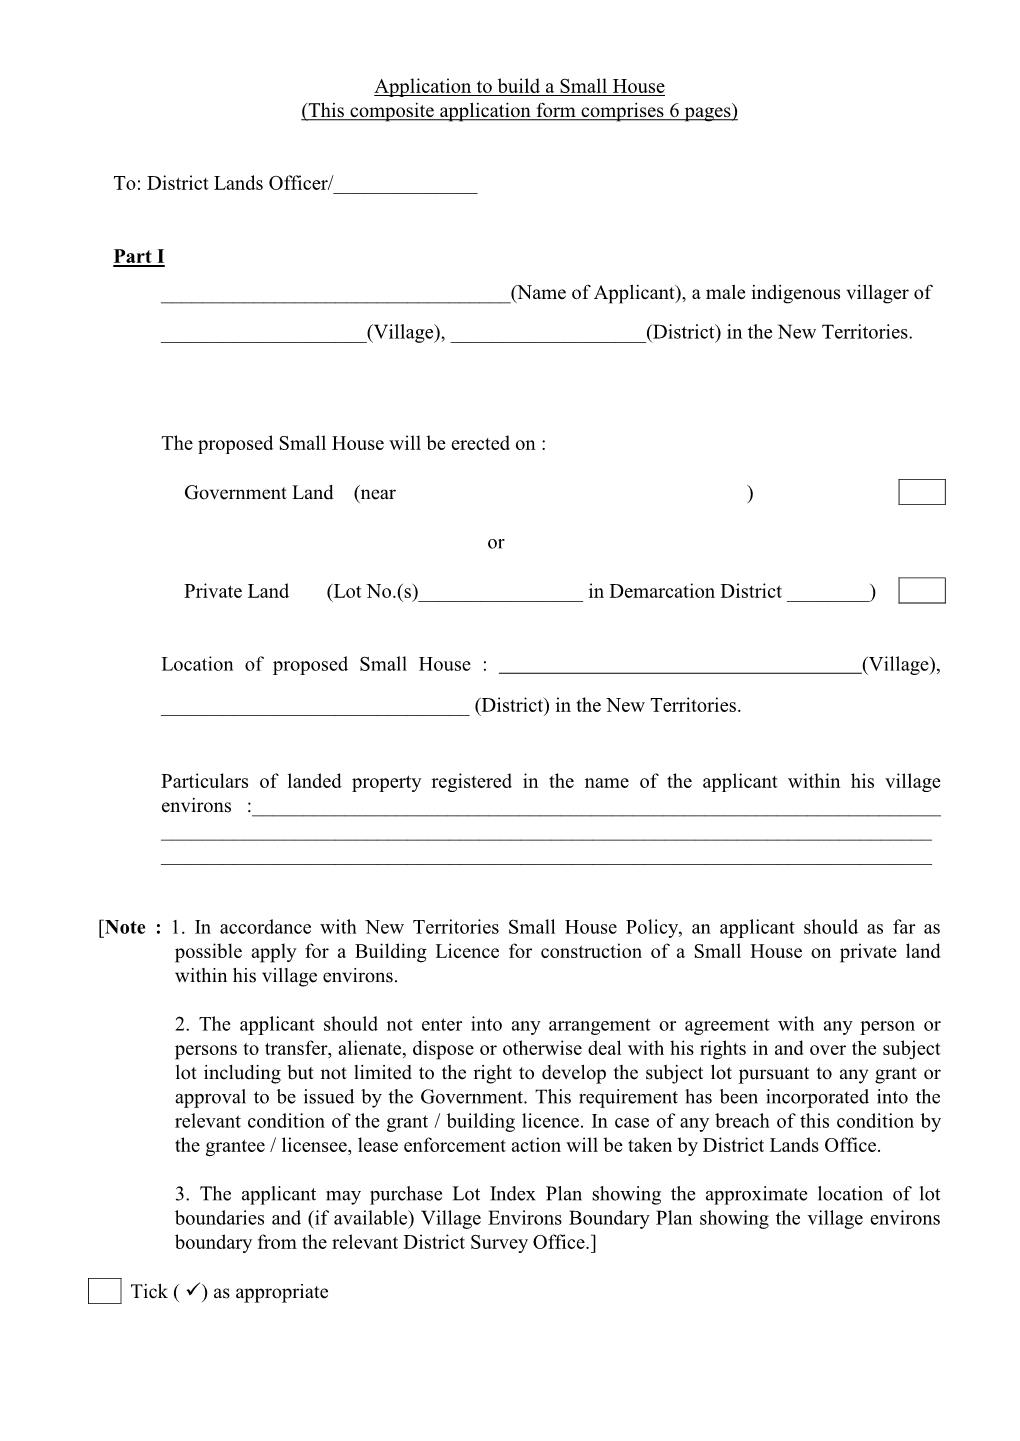 Application to Build a Small House This Composite Application Form